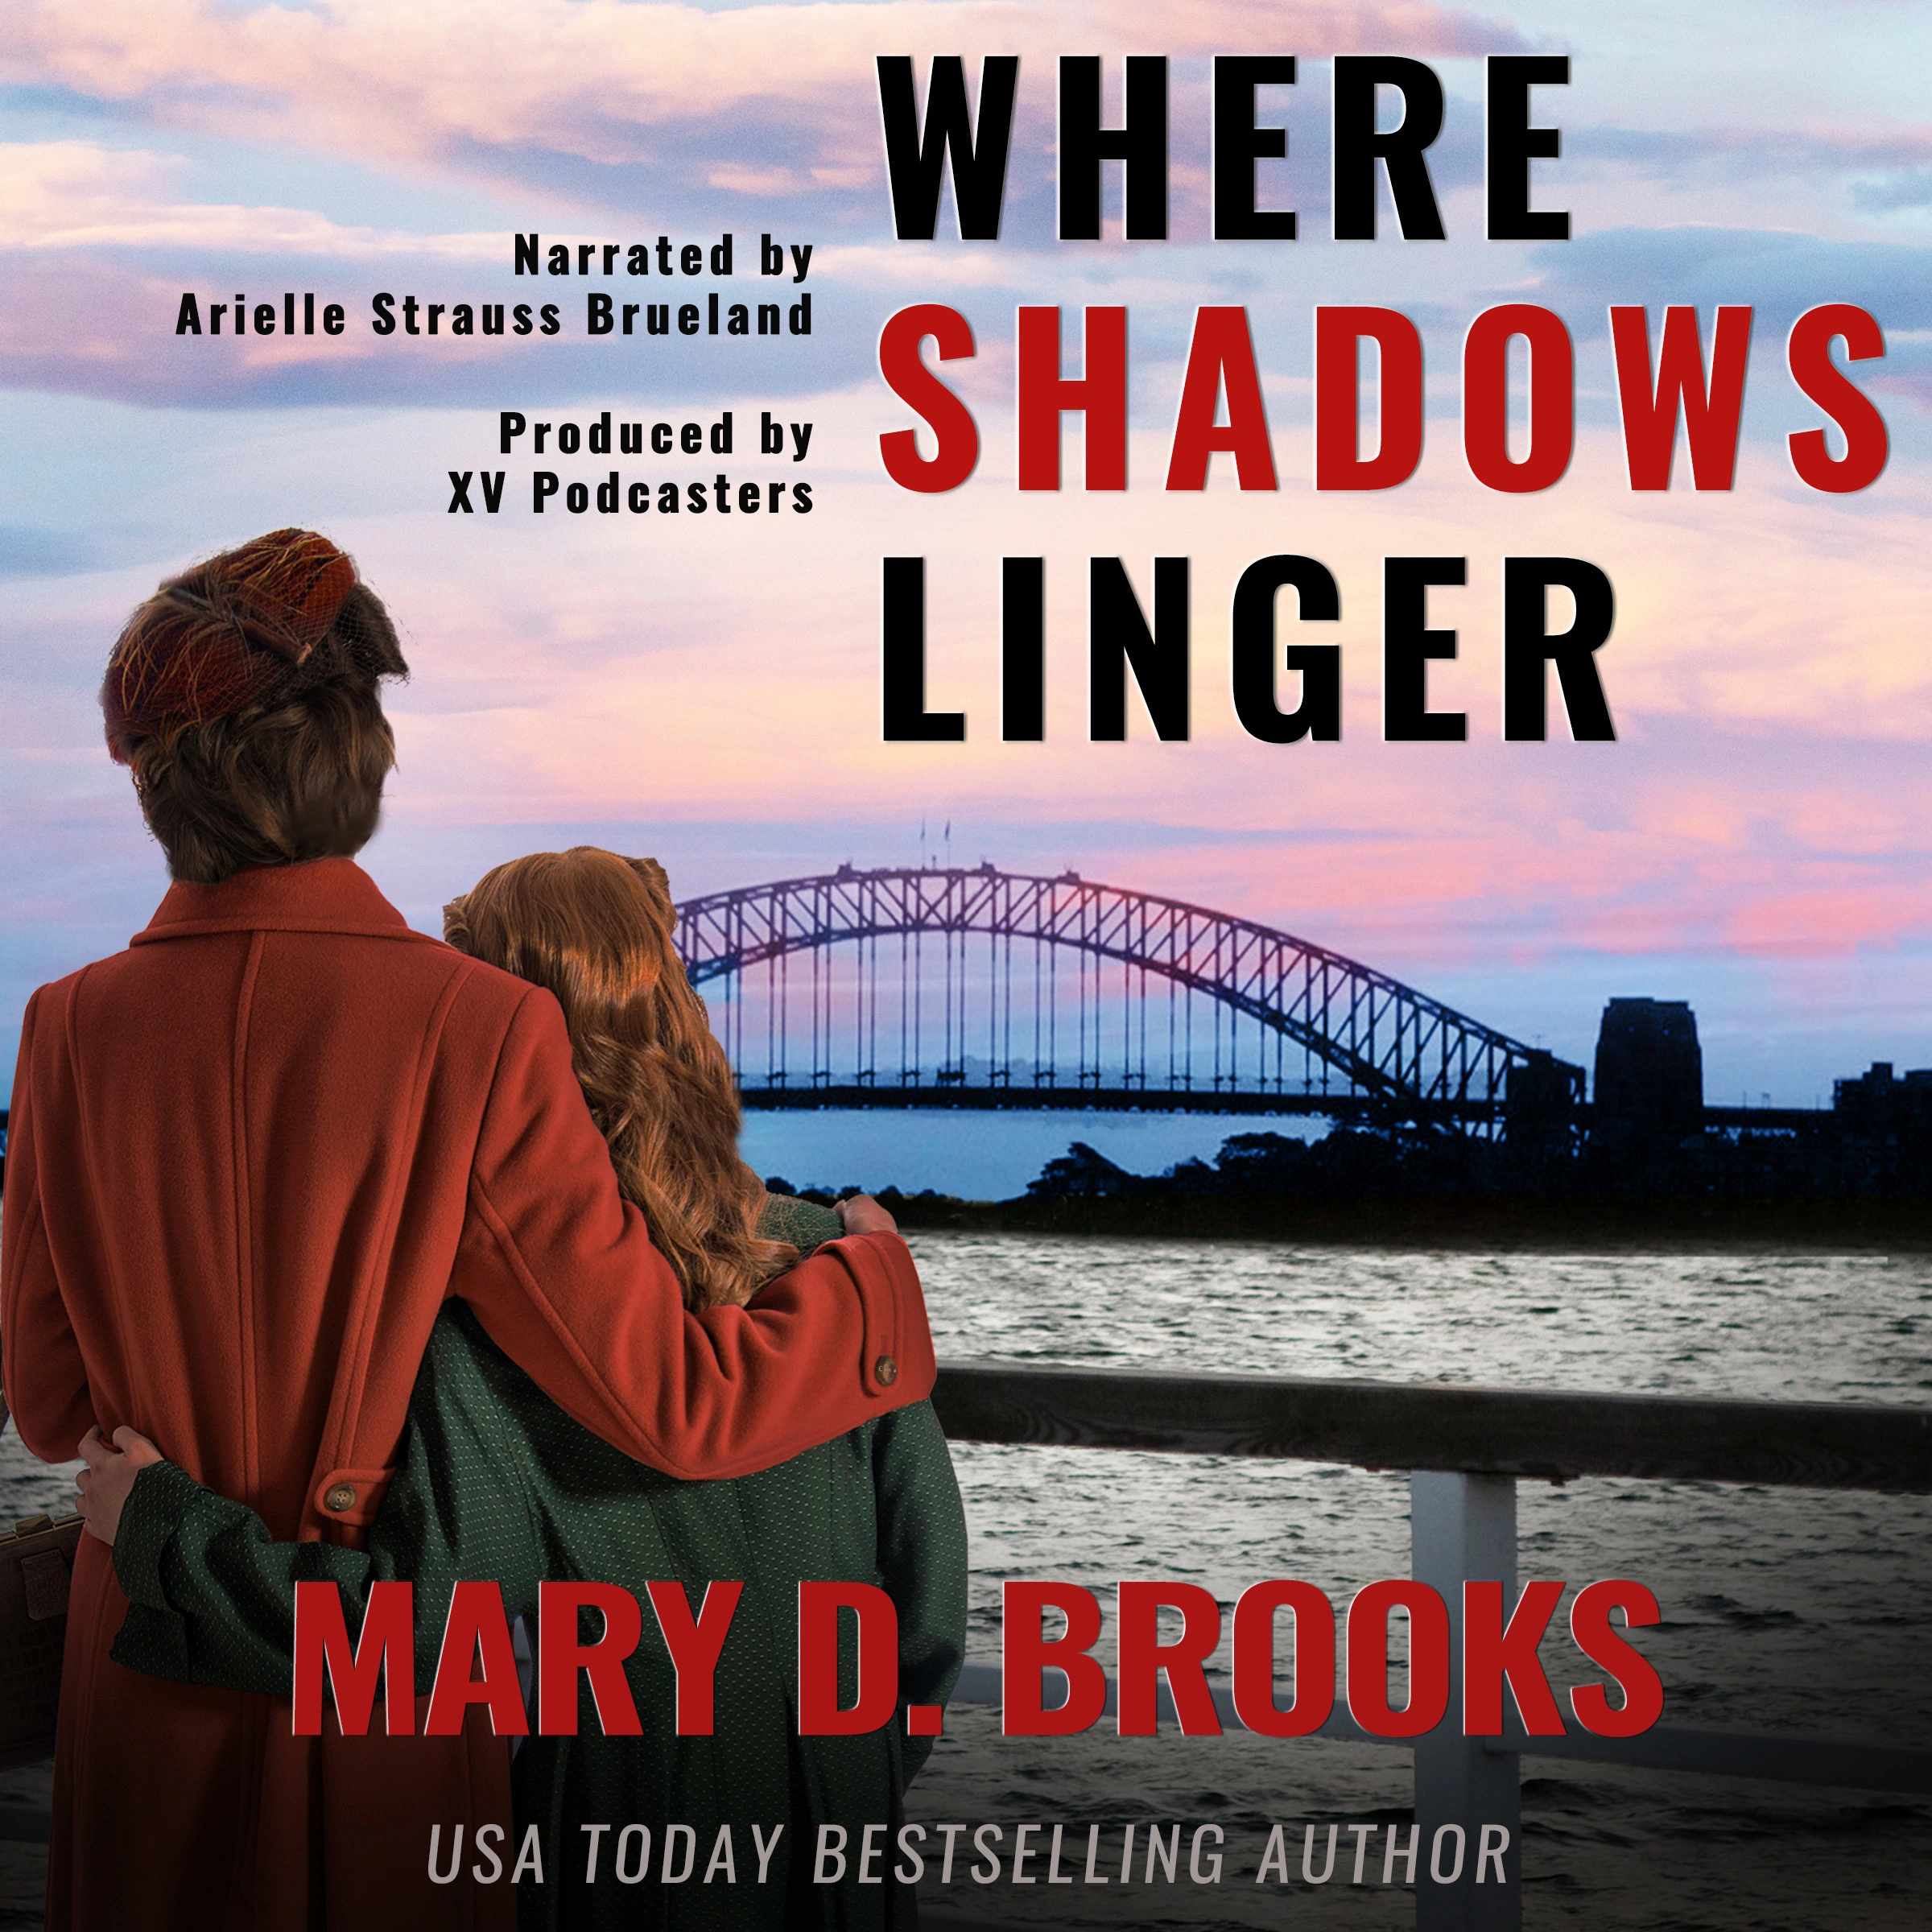 Where Shadows Linger by Mary D. Brooks Audiobook